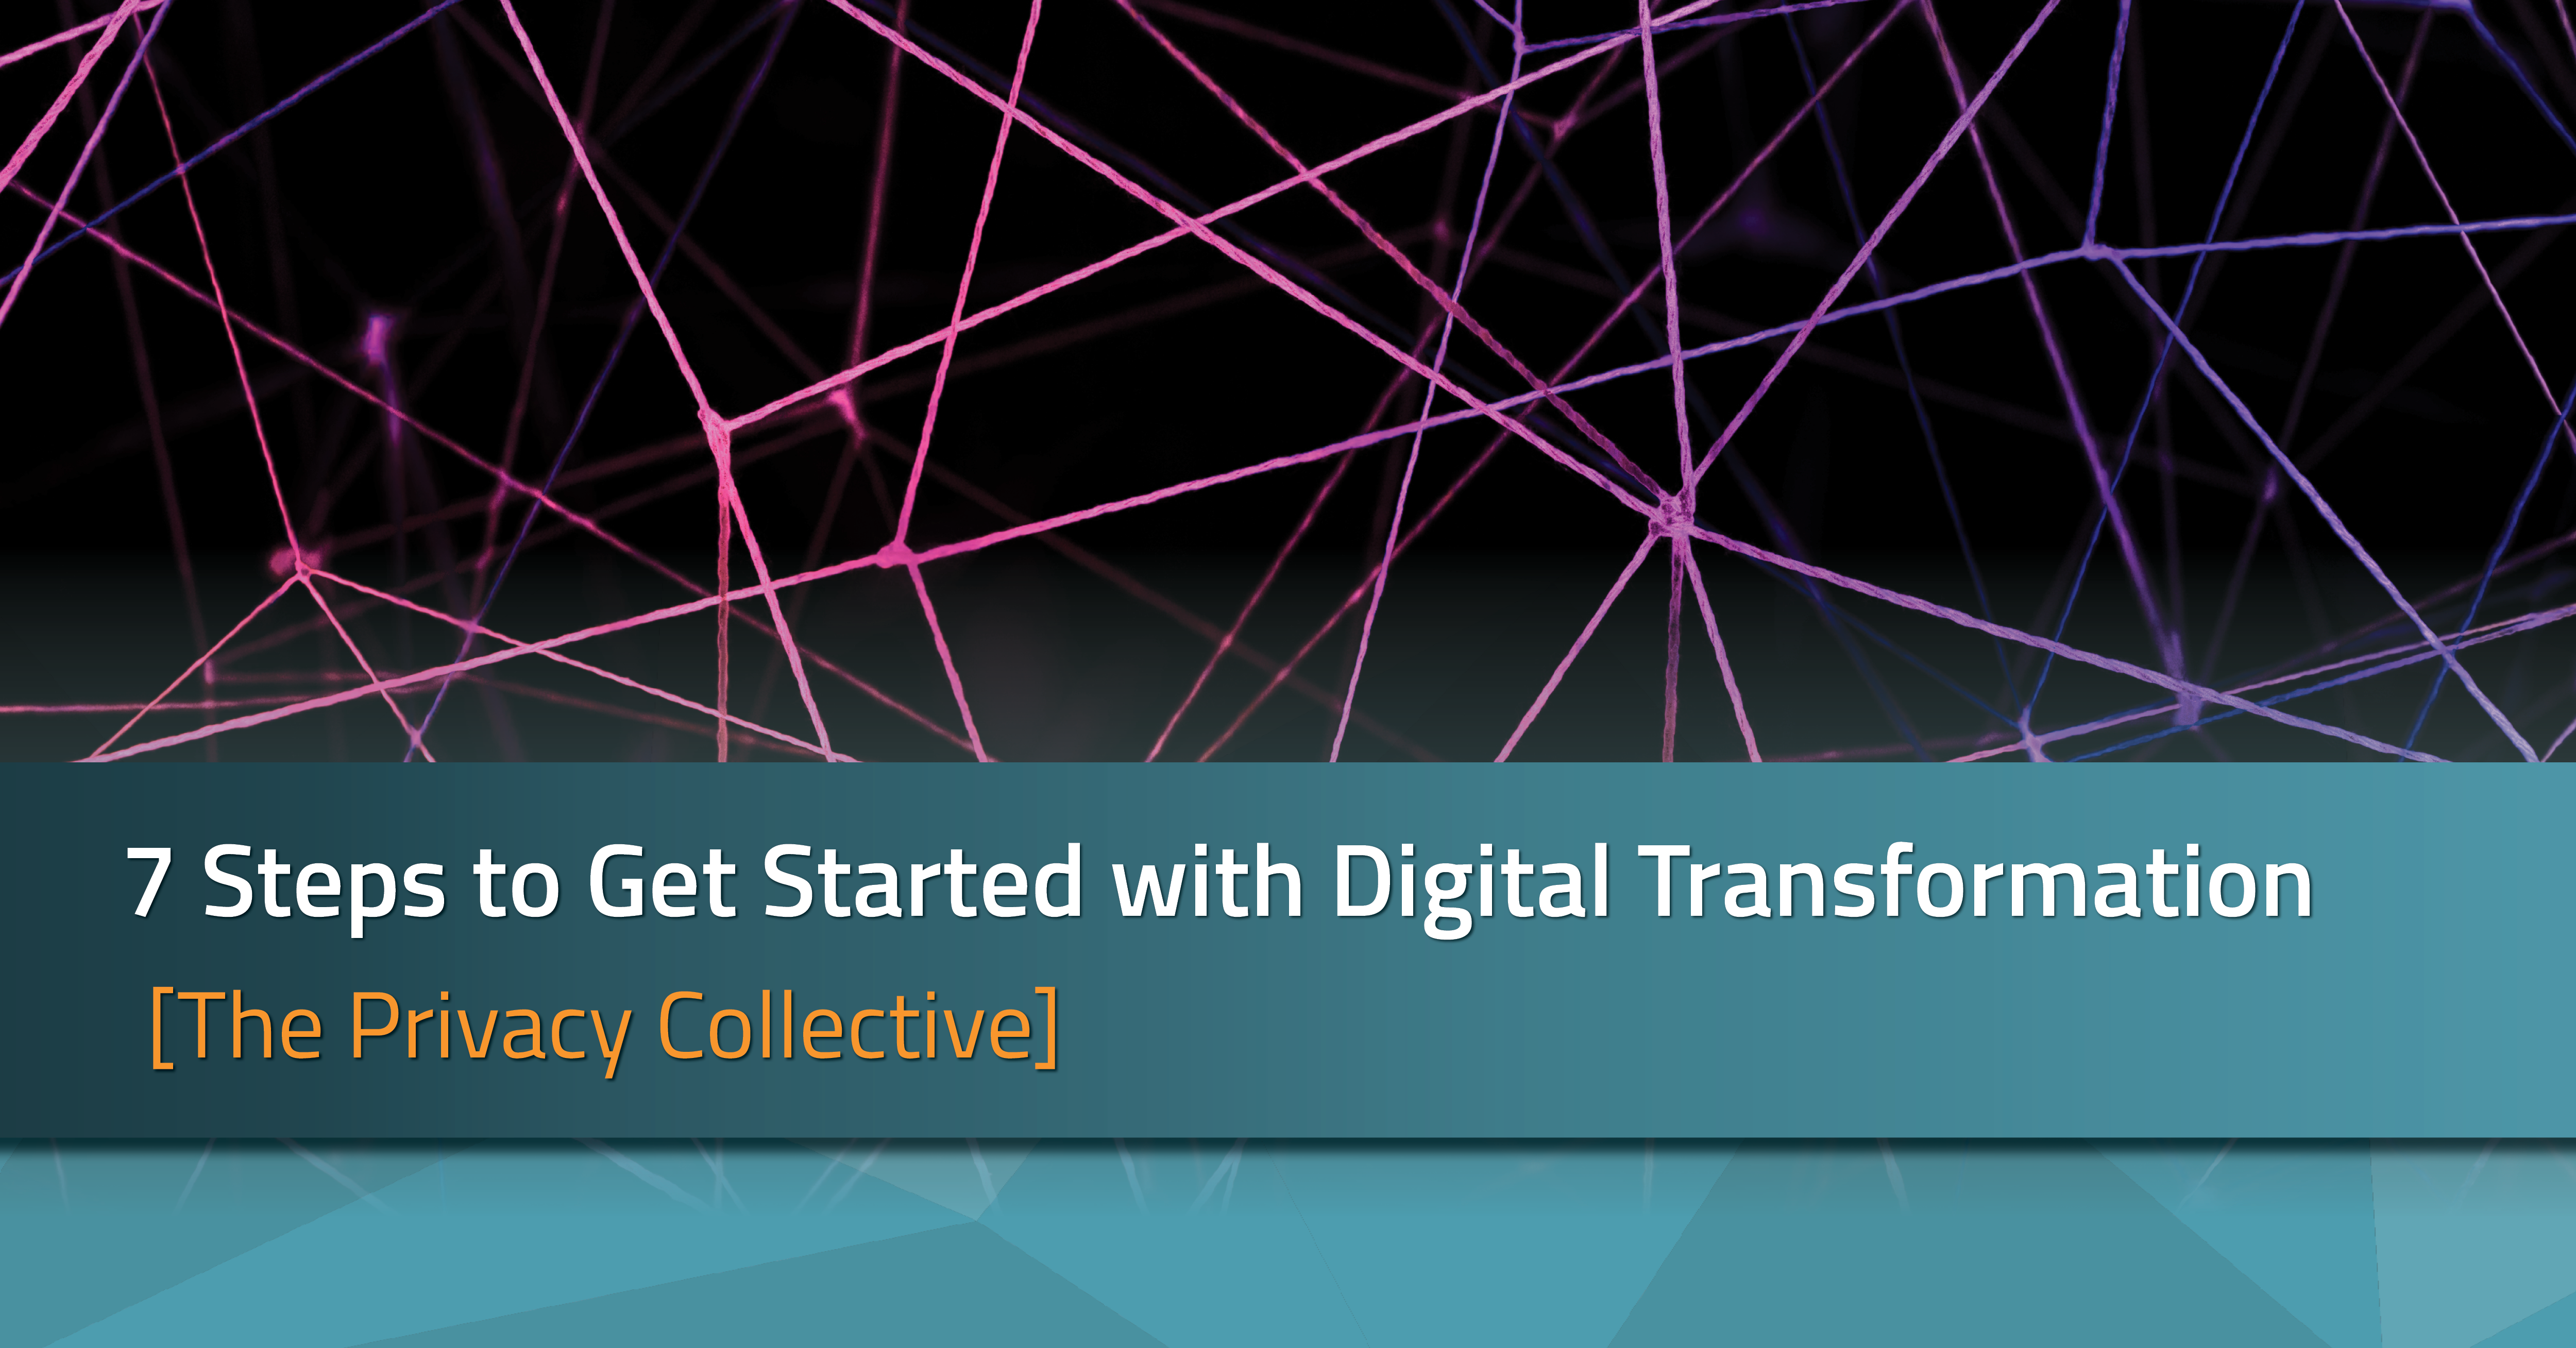 7 steps to get started with digital transformation for privacy | radarfirst